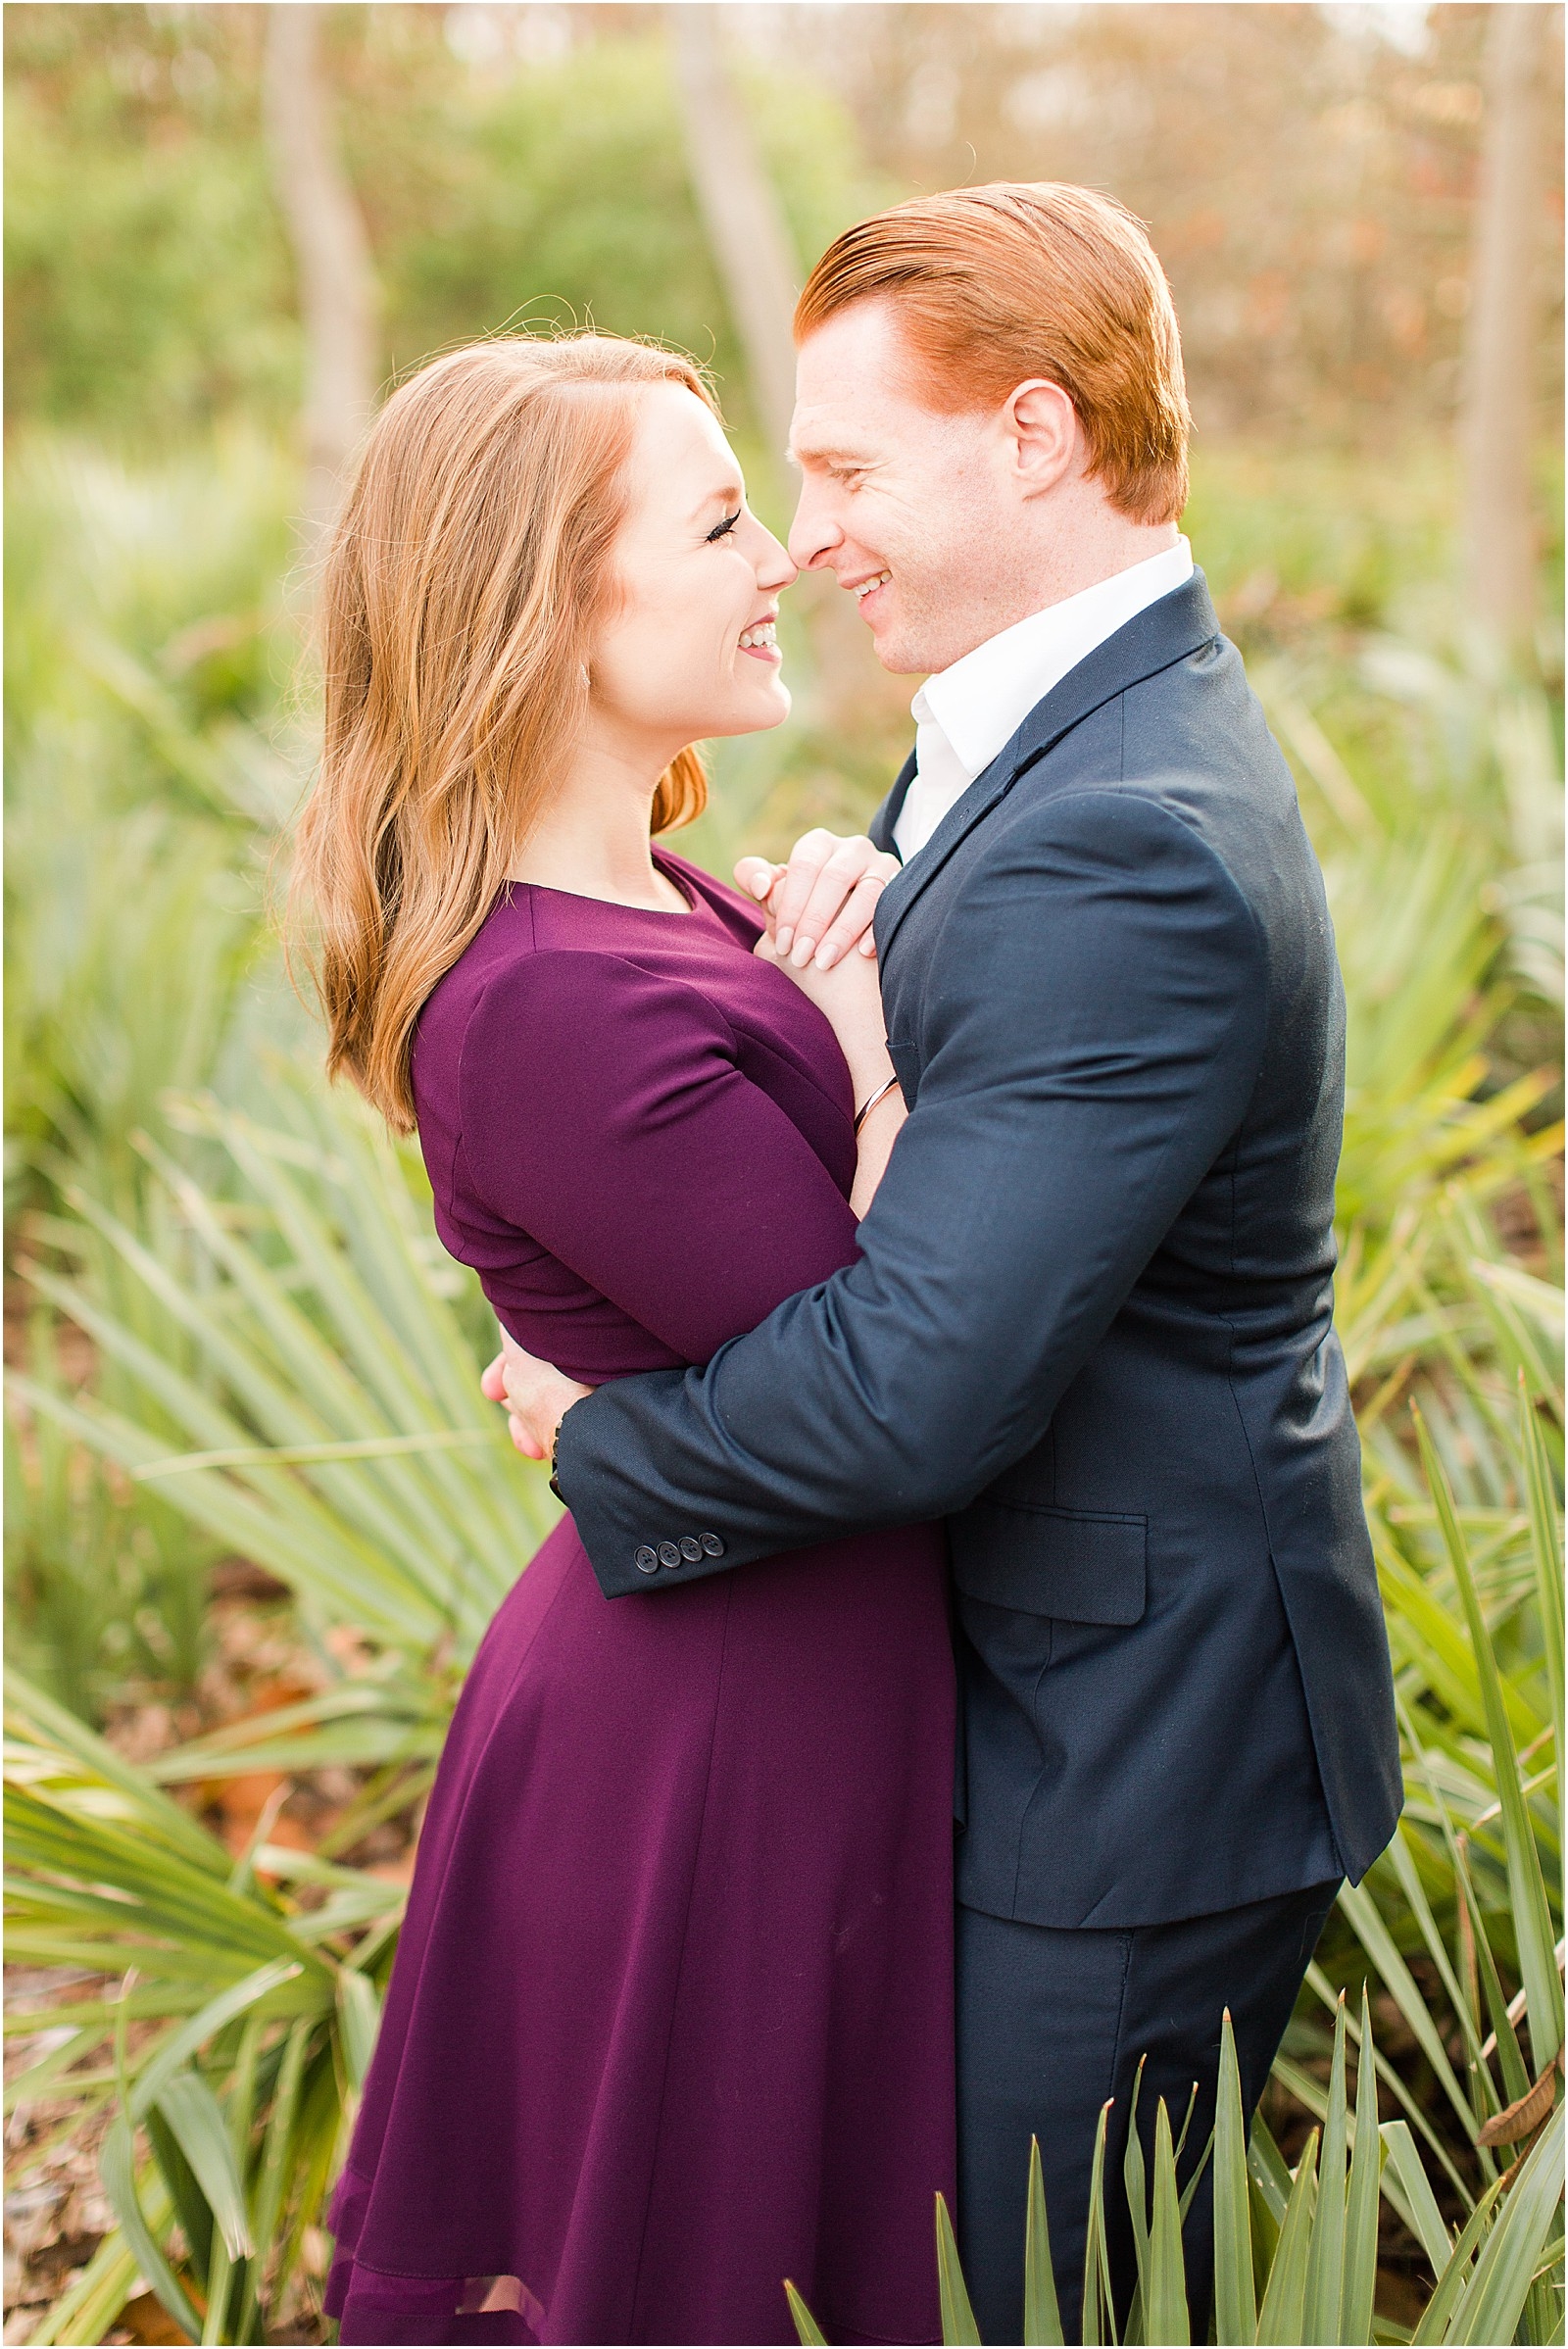 A Mesker Park Zoo Engagement Session | Jennah and Steve | Bret and Brandie Photography011.jpg